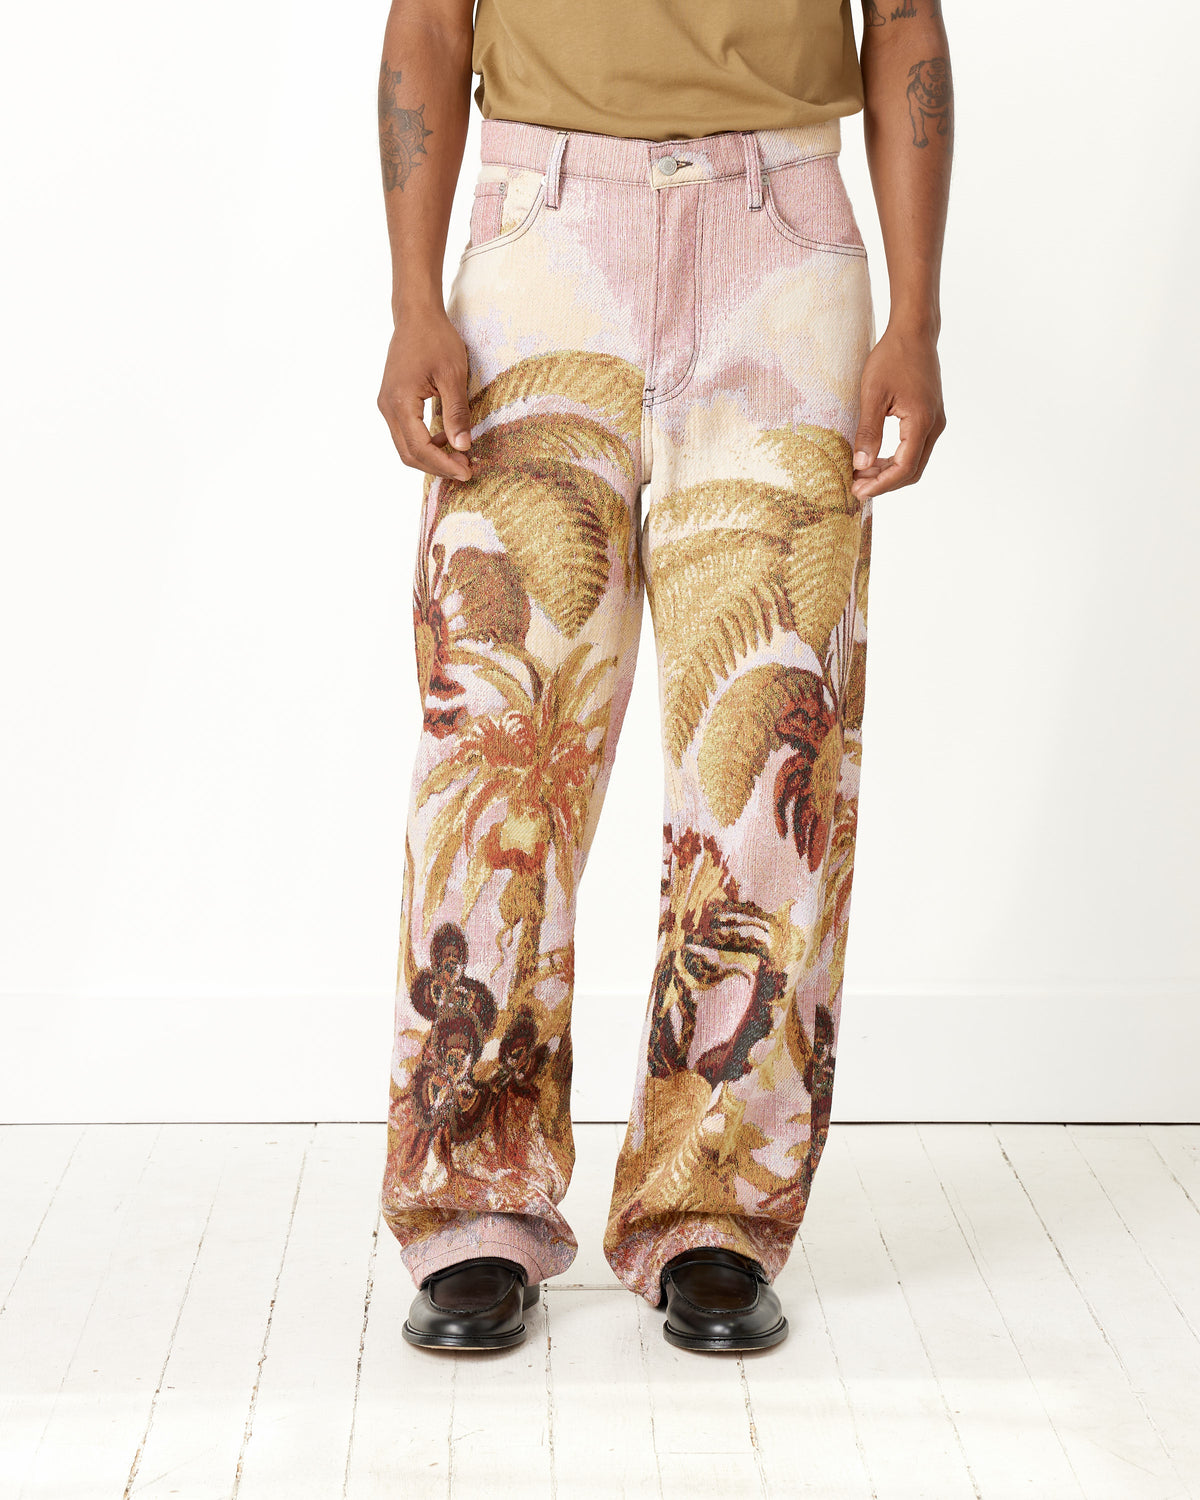 Cotton Jacquard Pant Dries Van Noten is offered at an affordable